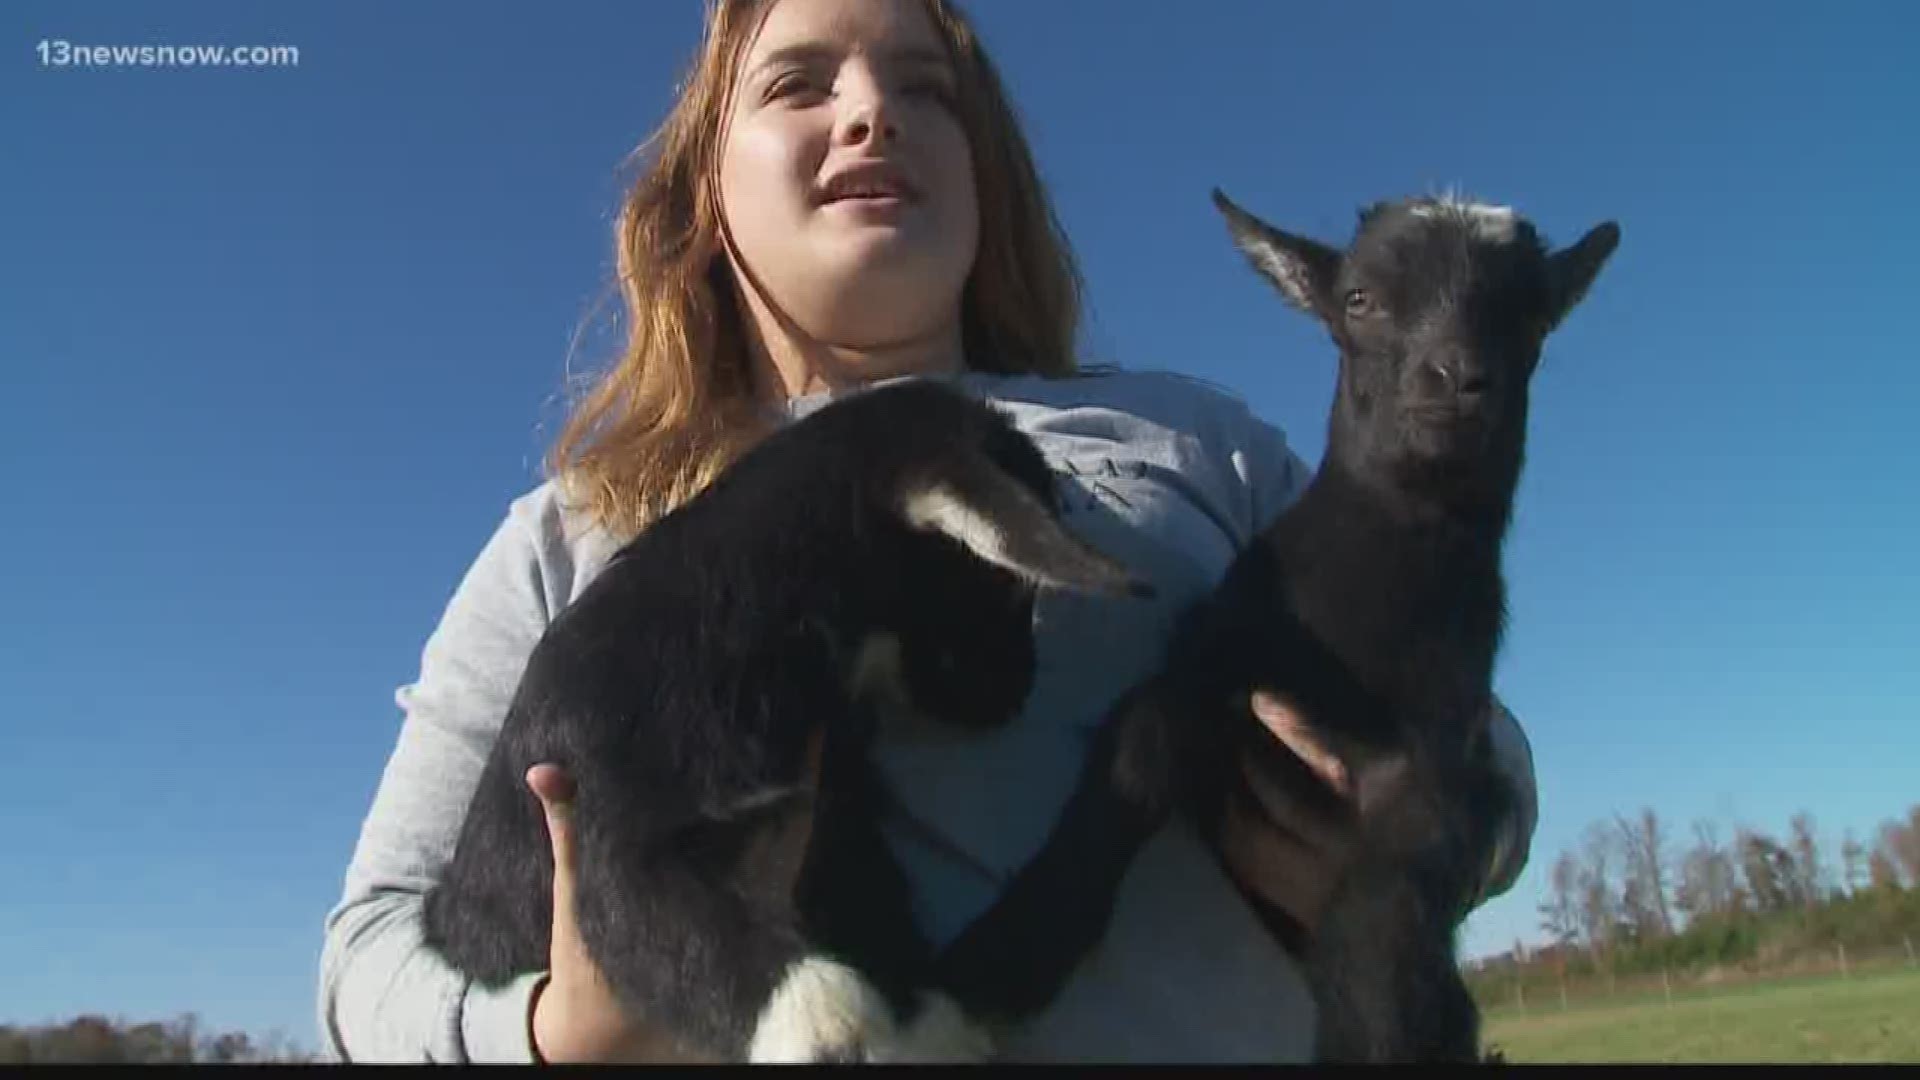 Students in Isle of Wight County School's Agriculture program were surprised to find five baby goats born when they arrived to class Wednesday morning.